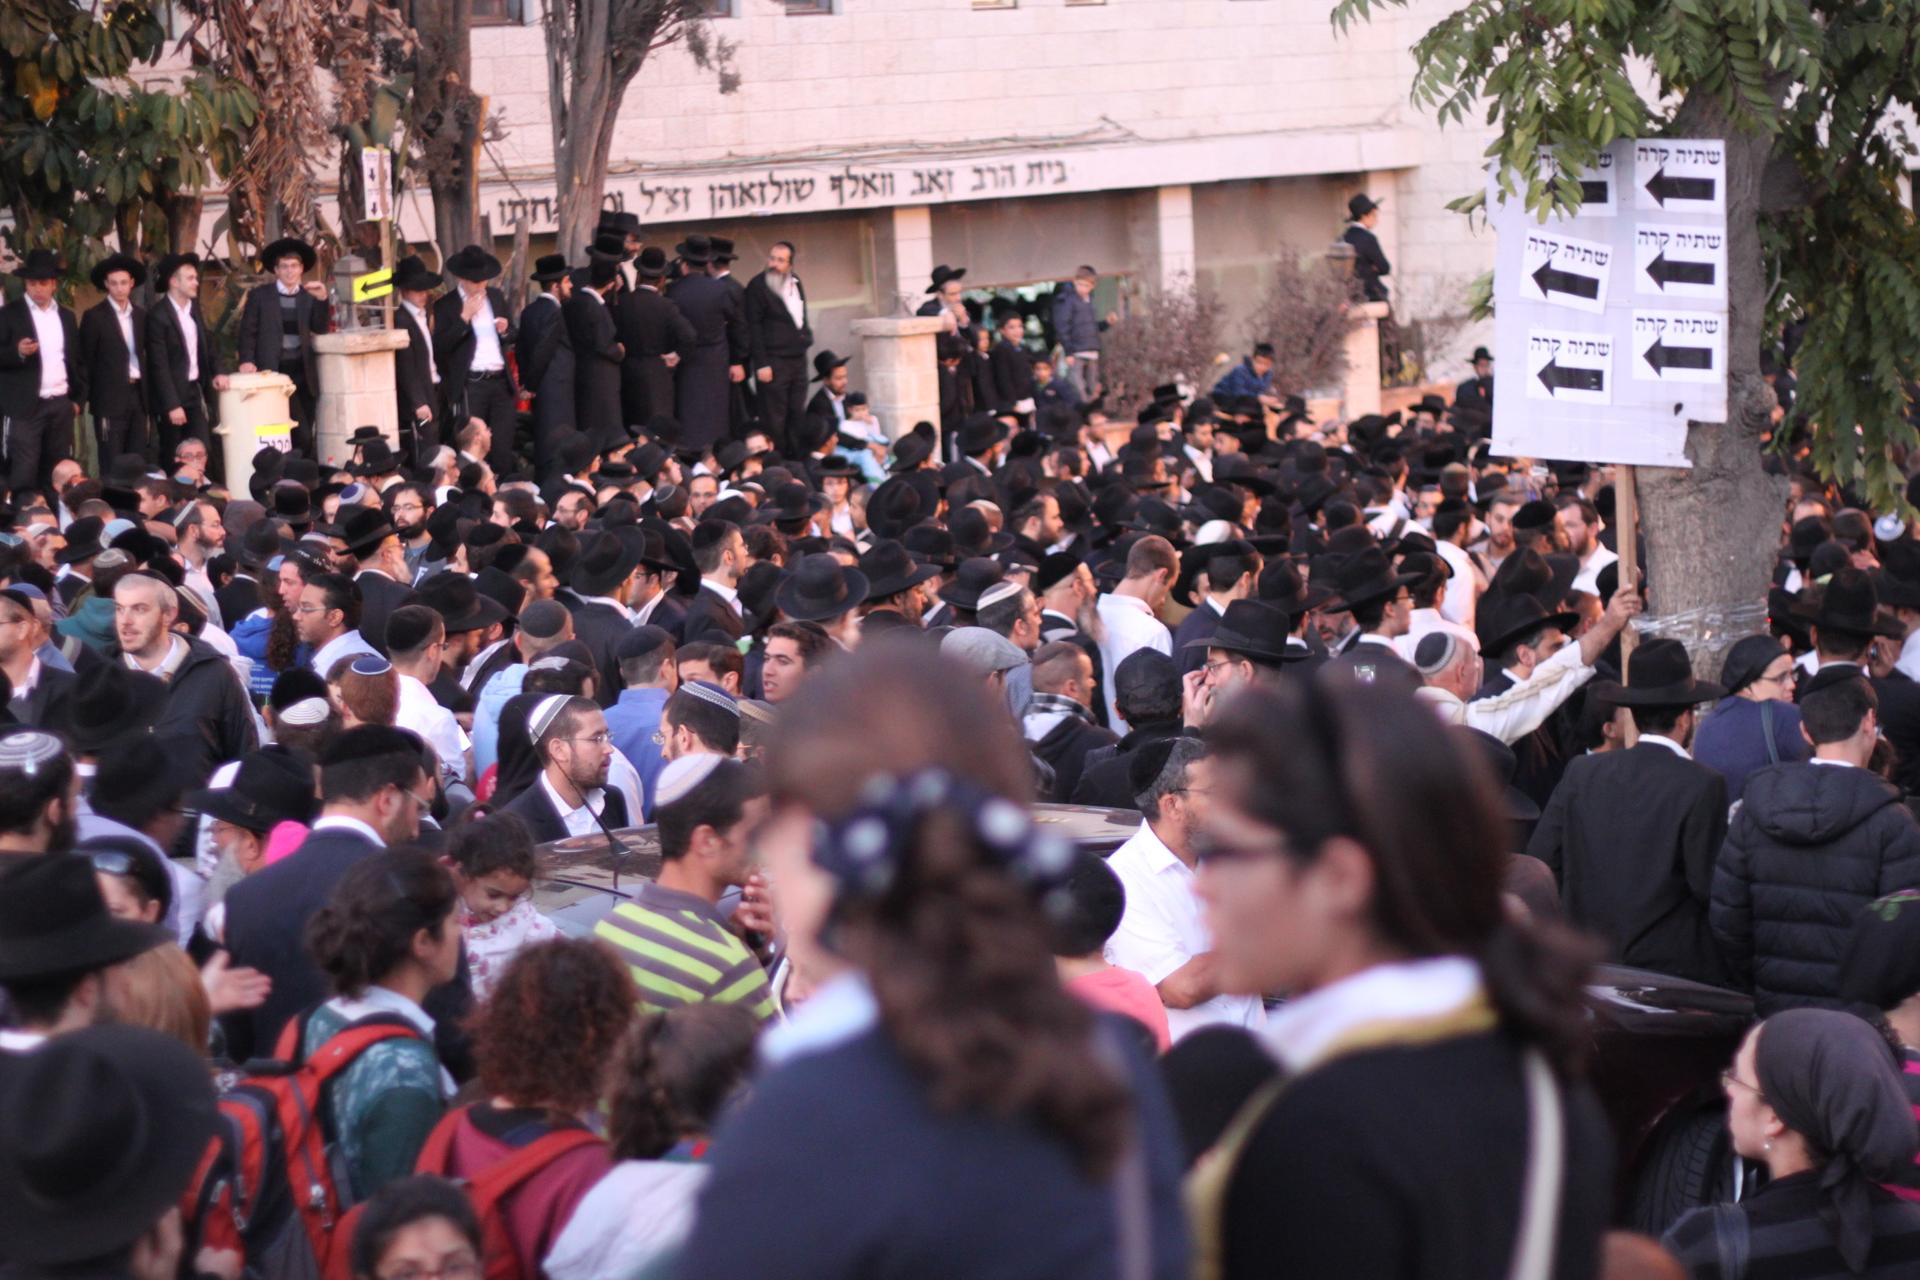 Throngs of ultra-orthodox and Sephardic Jews packed the streets of Jerusalem for Rabbi Ovadia Yosef's funeral.